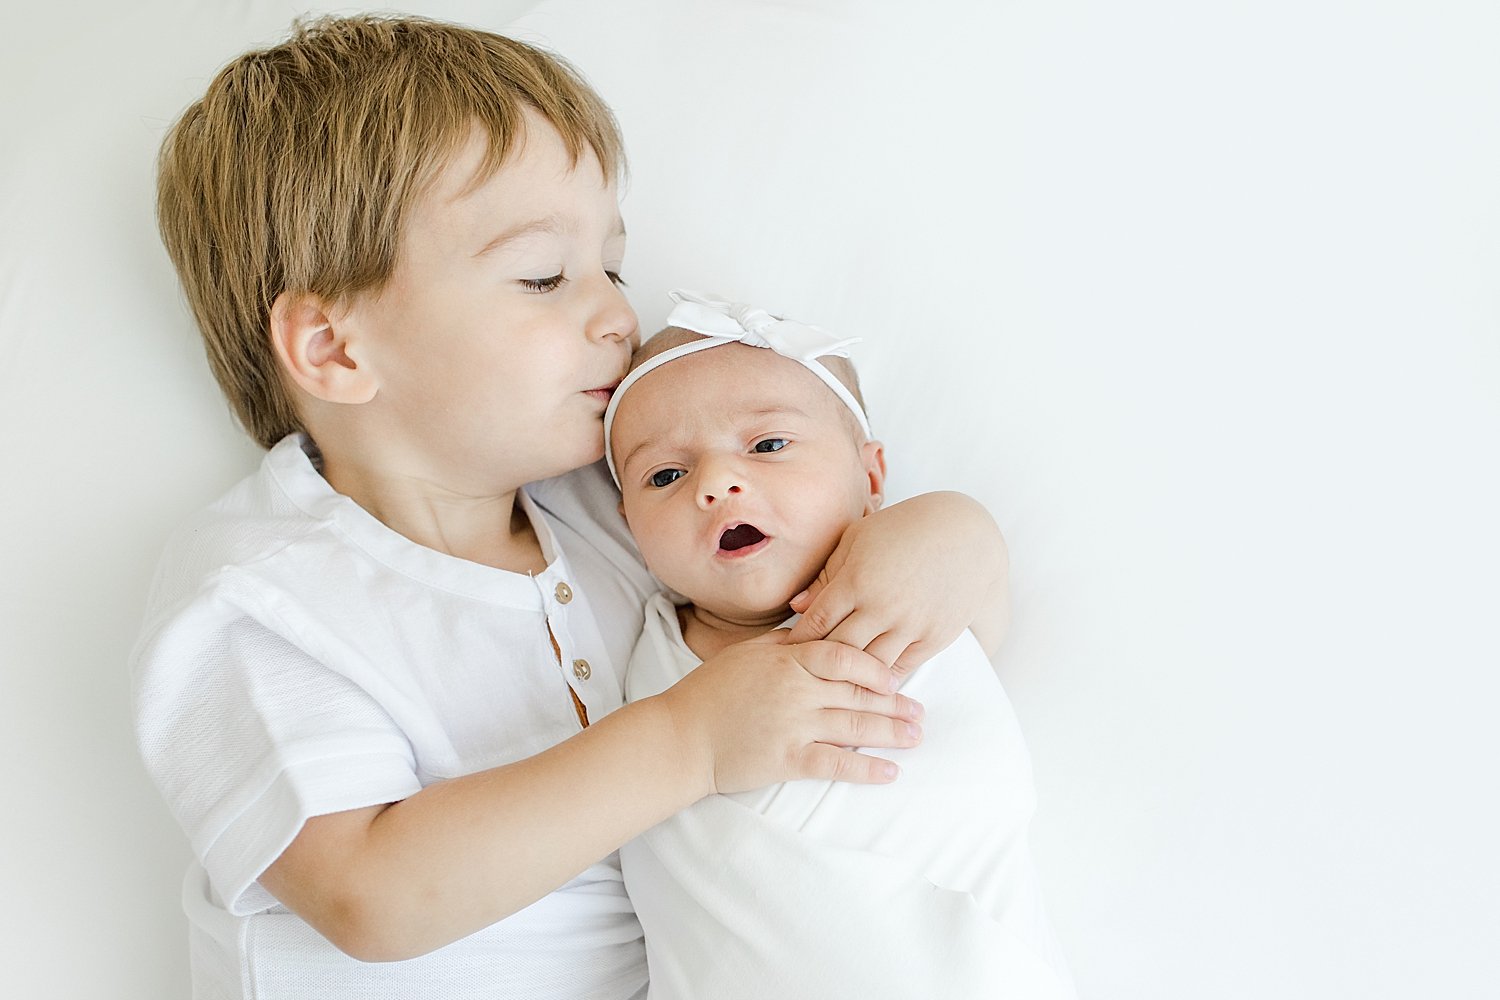 Sibling photos during newborn session in Westport, CT studio | Kristin Wood Photography